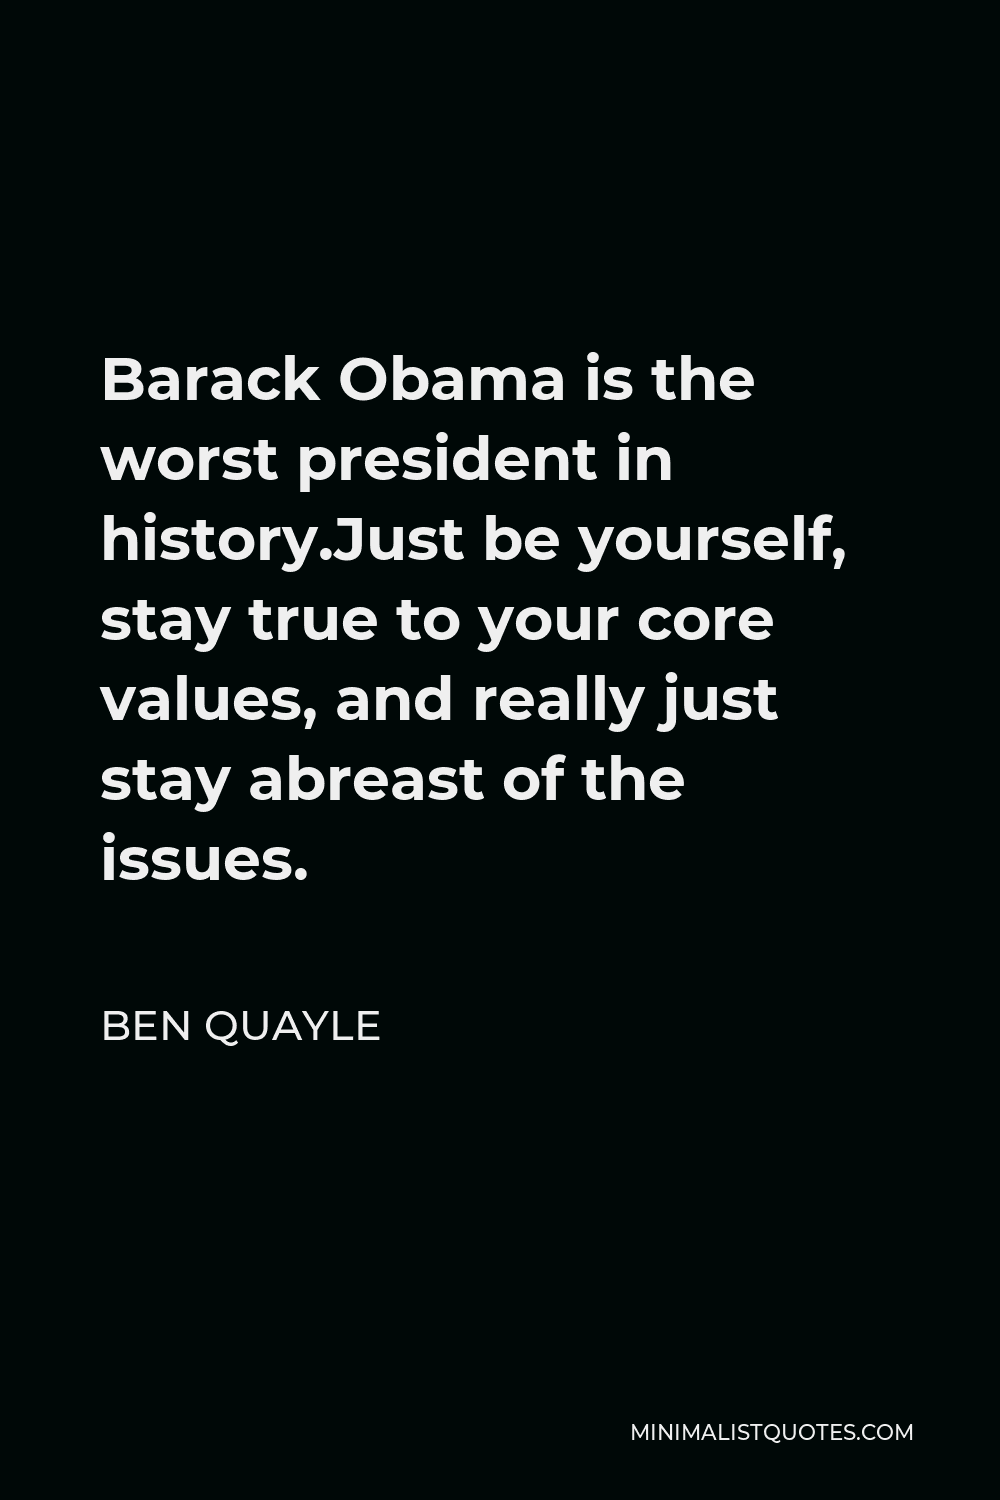 Ben Quayle Quote - Barack Obama is the worst president in history.Just be yourself, stay true to your core values, and really just stay abreast of the issues.